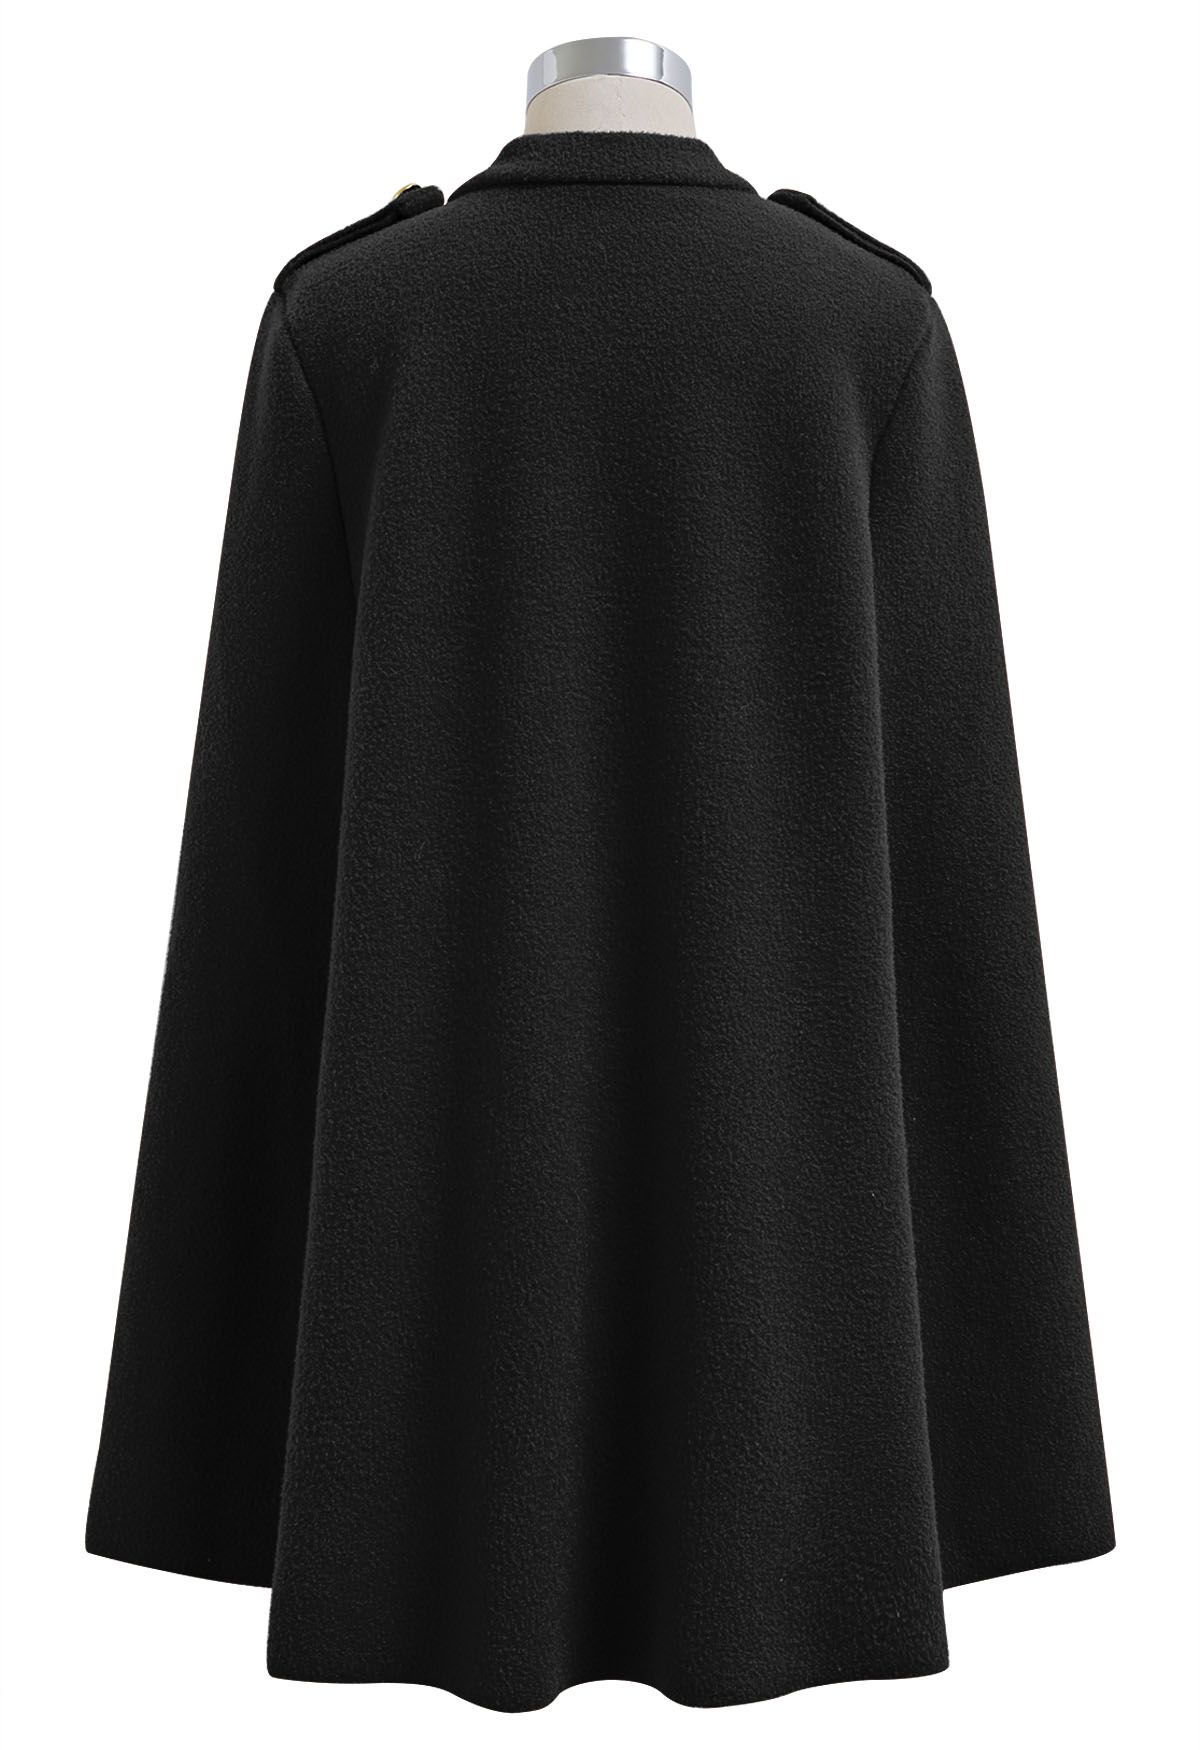 Golden Button Belted Cape Coat in Black - Retro, Indie and Unique Fashion